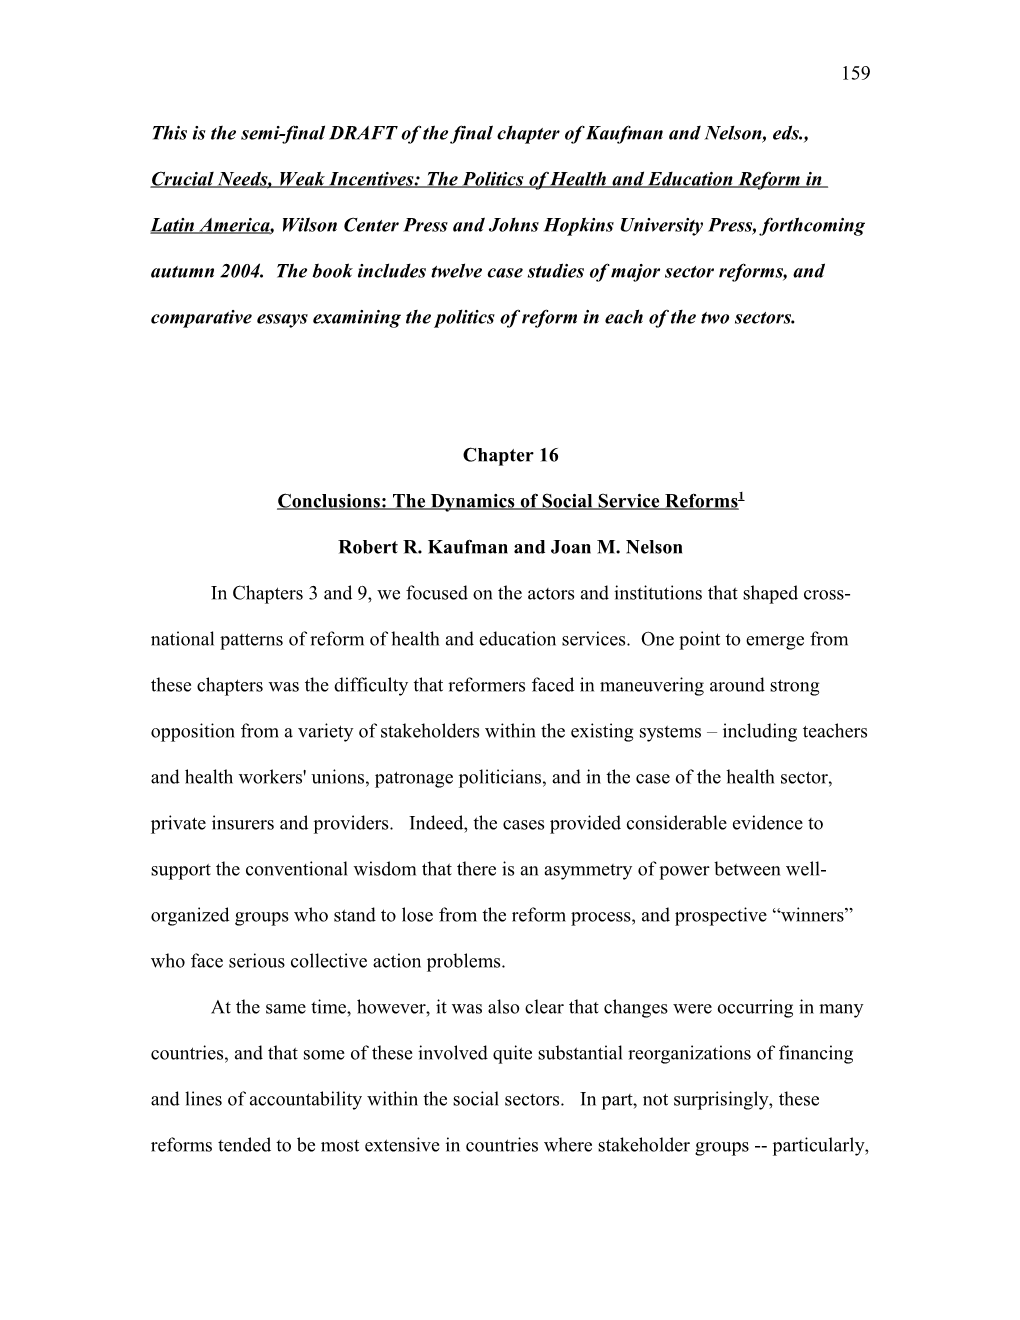 Conclusions: the Dynamics of Social Service Reforms 1